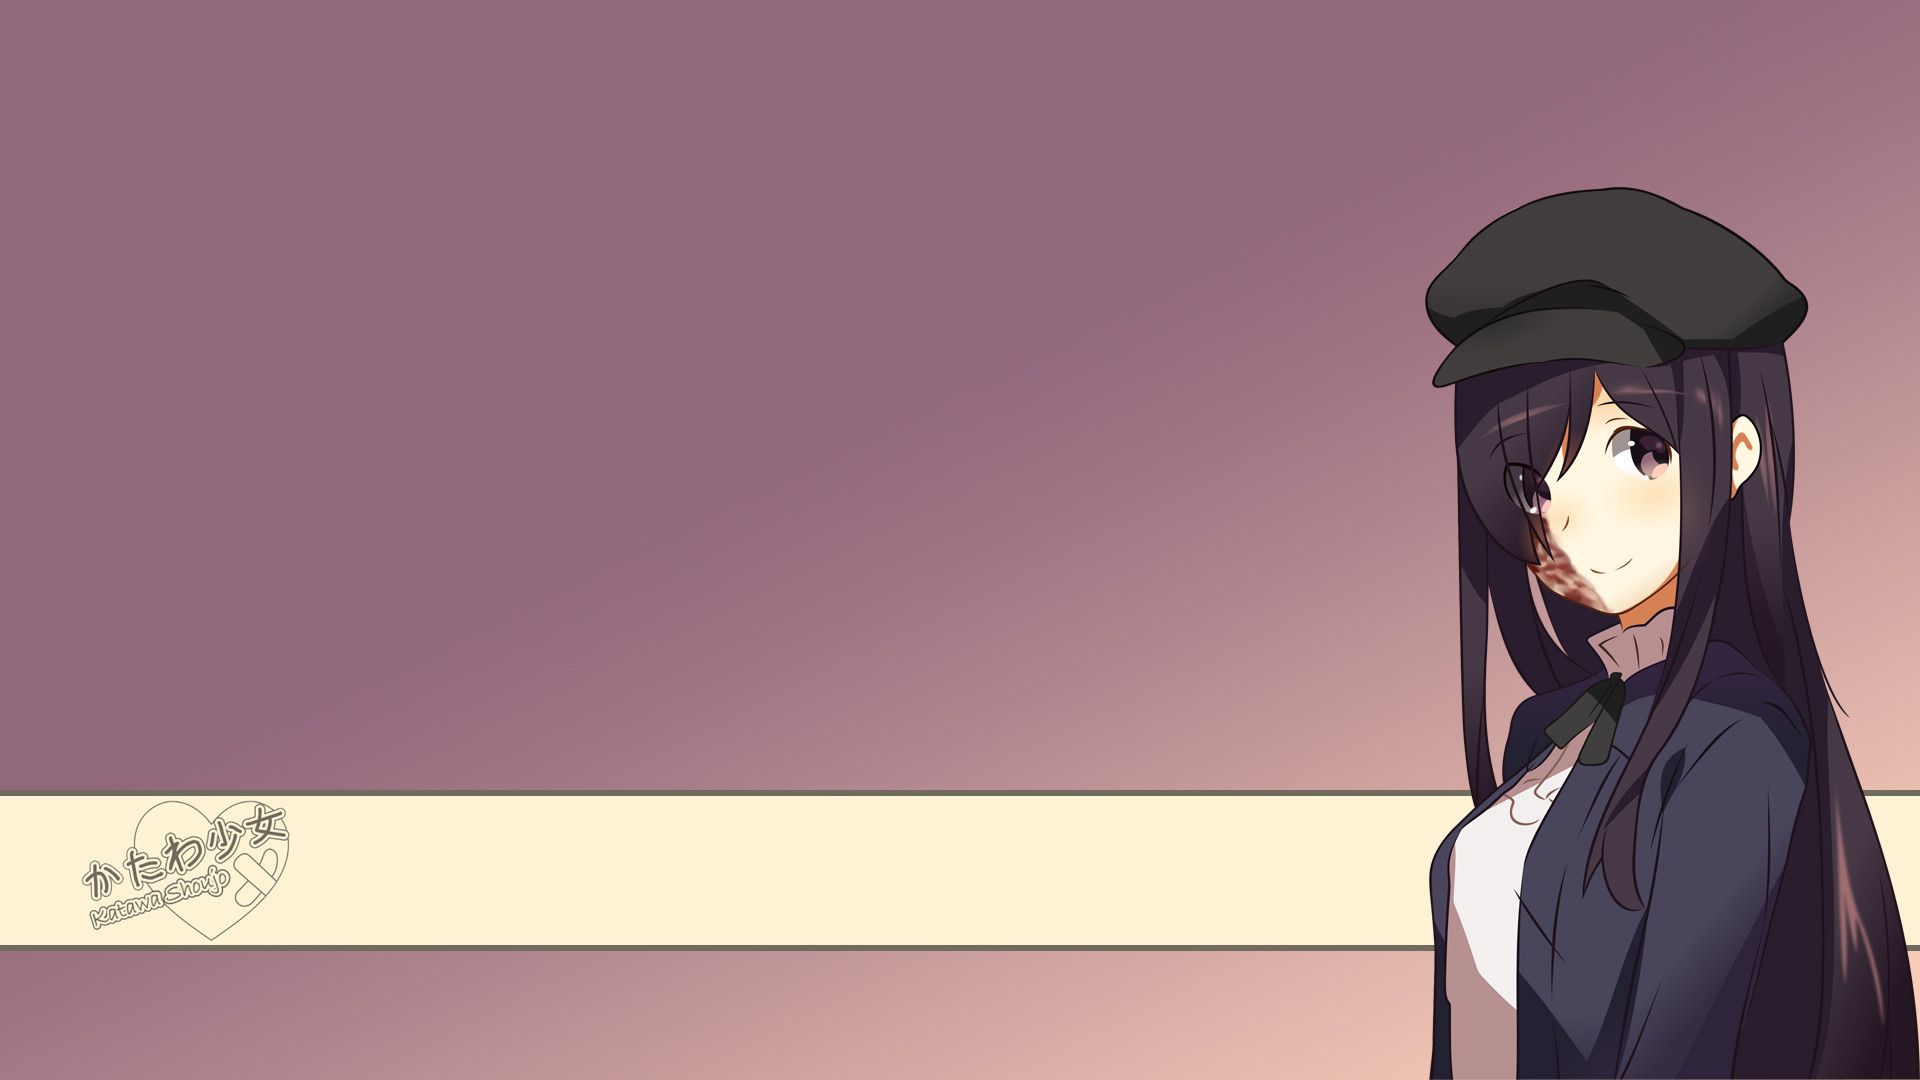 Im lookng for wallpapers or my new laptop katawashoujo